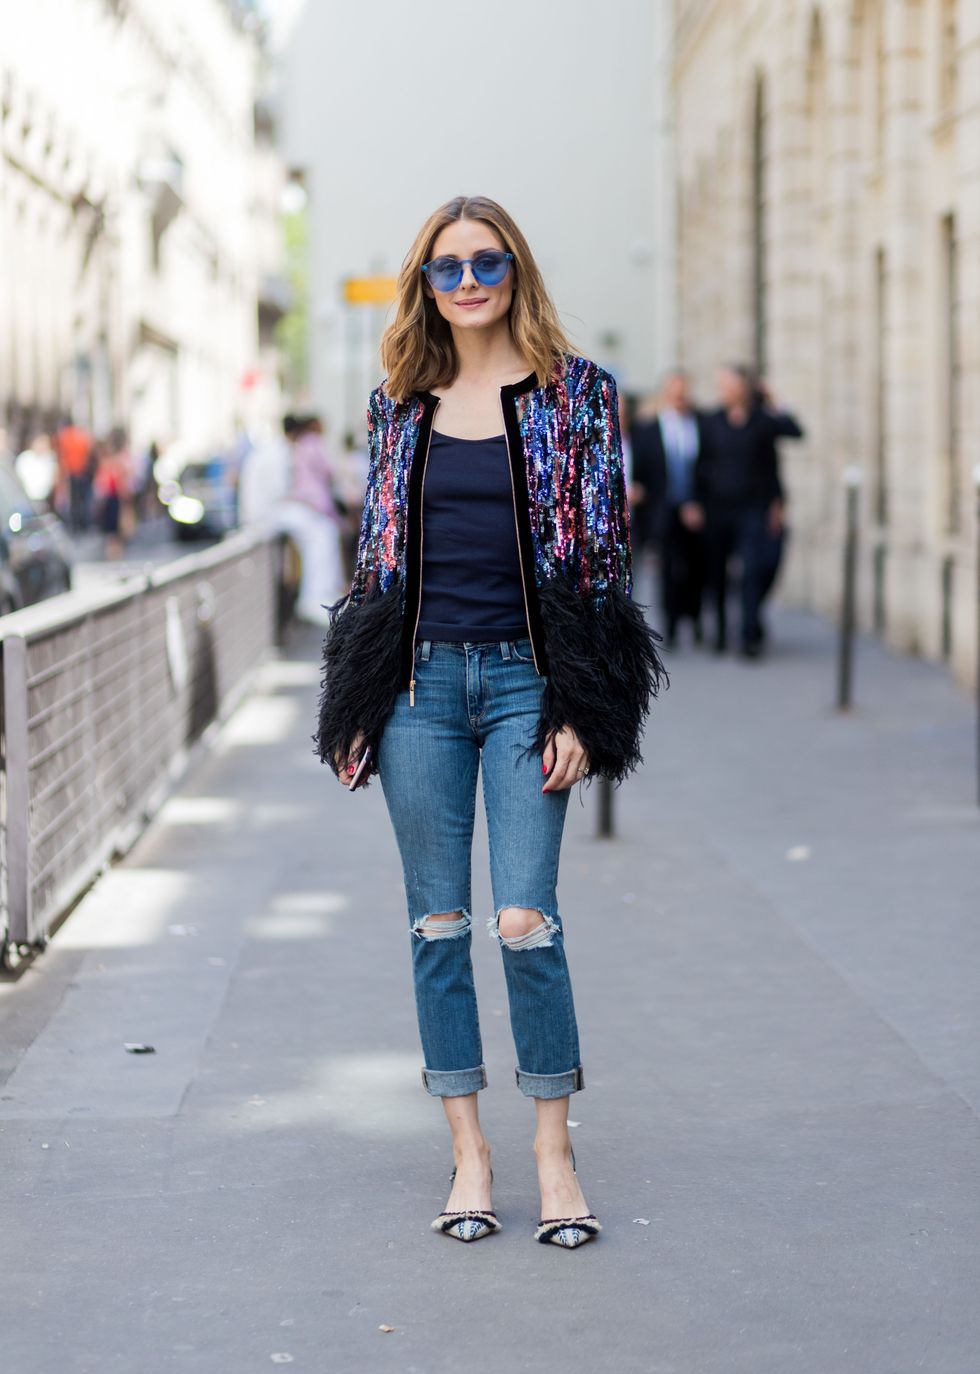 PARIS, FRANCE - JULY 05: Olivia Palermo wearing ripped denim jeans, glitter jacket, blue sunglasses, navy tshirt, heels outside Elie Saab during Paris Fashion Week - Haute Couture Fall/Winter 2017-2018 : Day Four on July 5, 2017 in Paris, France. (Photo by Christian Vierig/Getty Images)